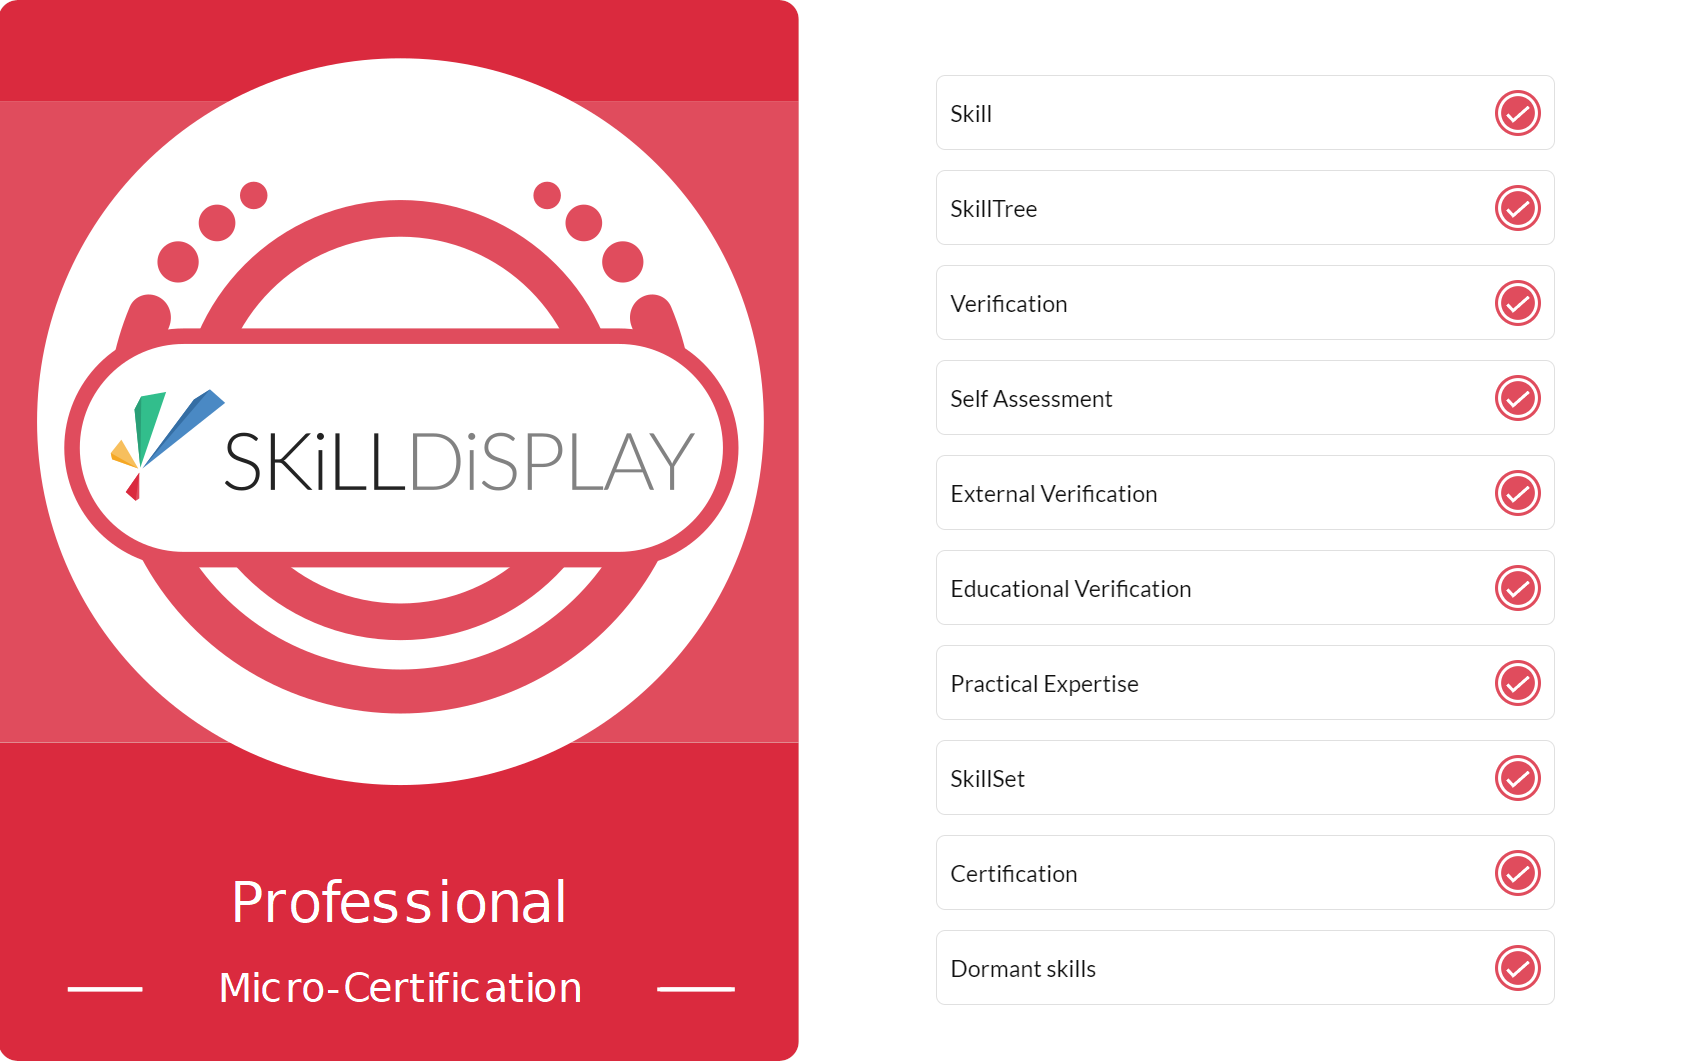 SkillDisplay Micro-Certification Badge for the SkillDisplay Certified Professional with a skill list besides it, that shows which skills are required to obtain the badge